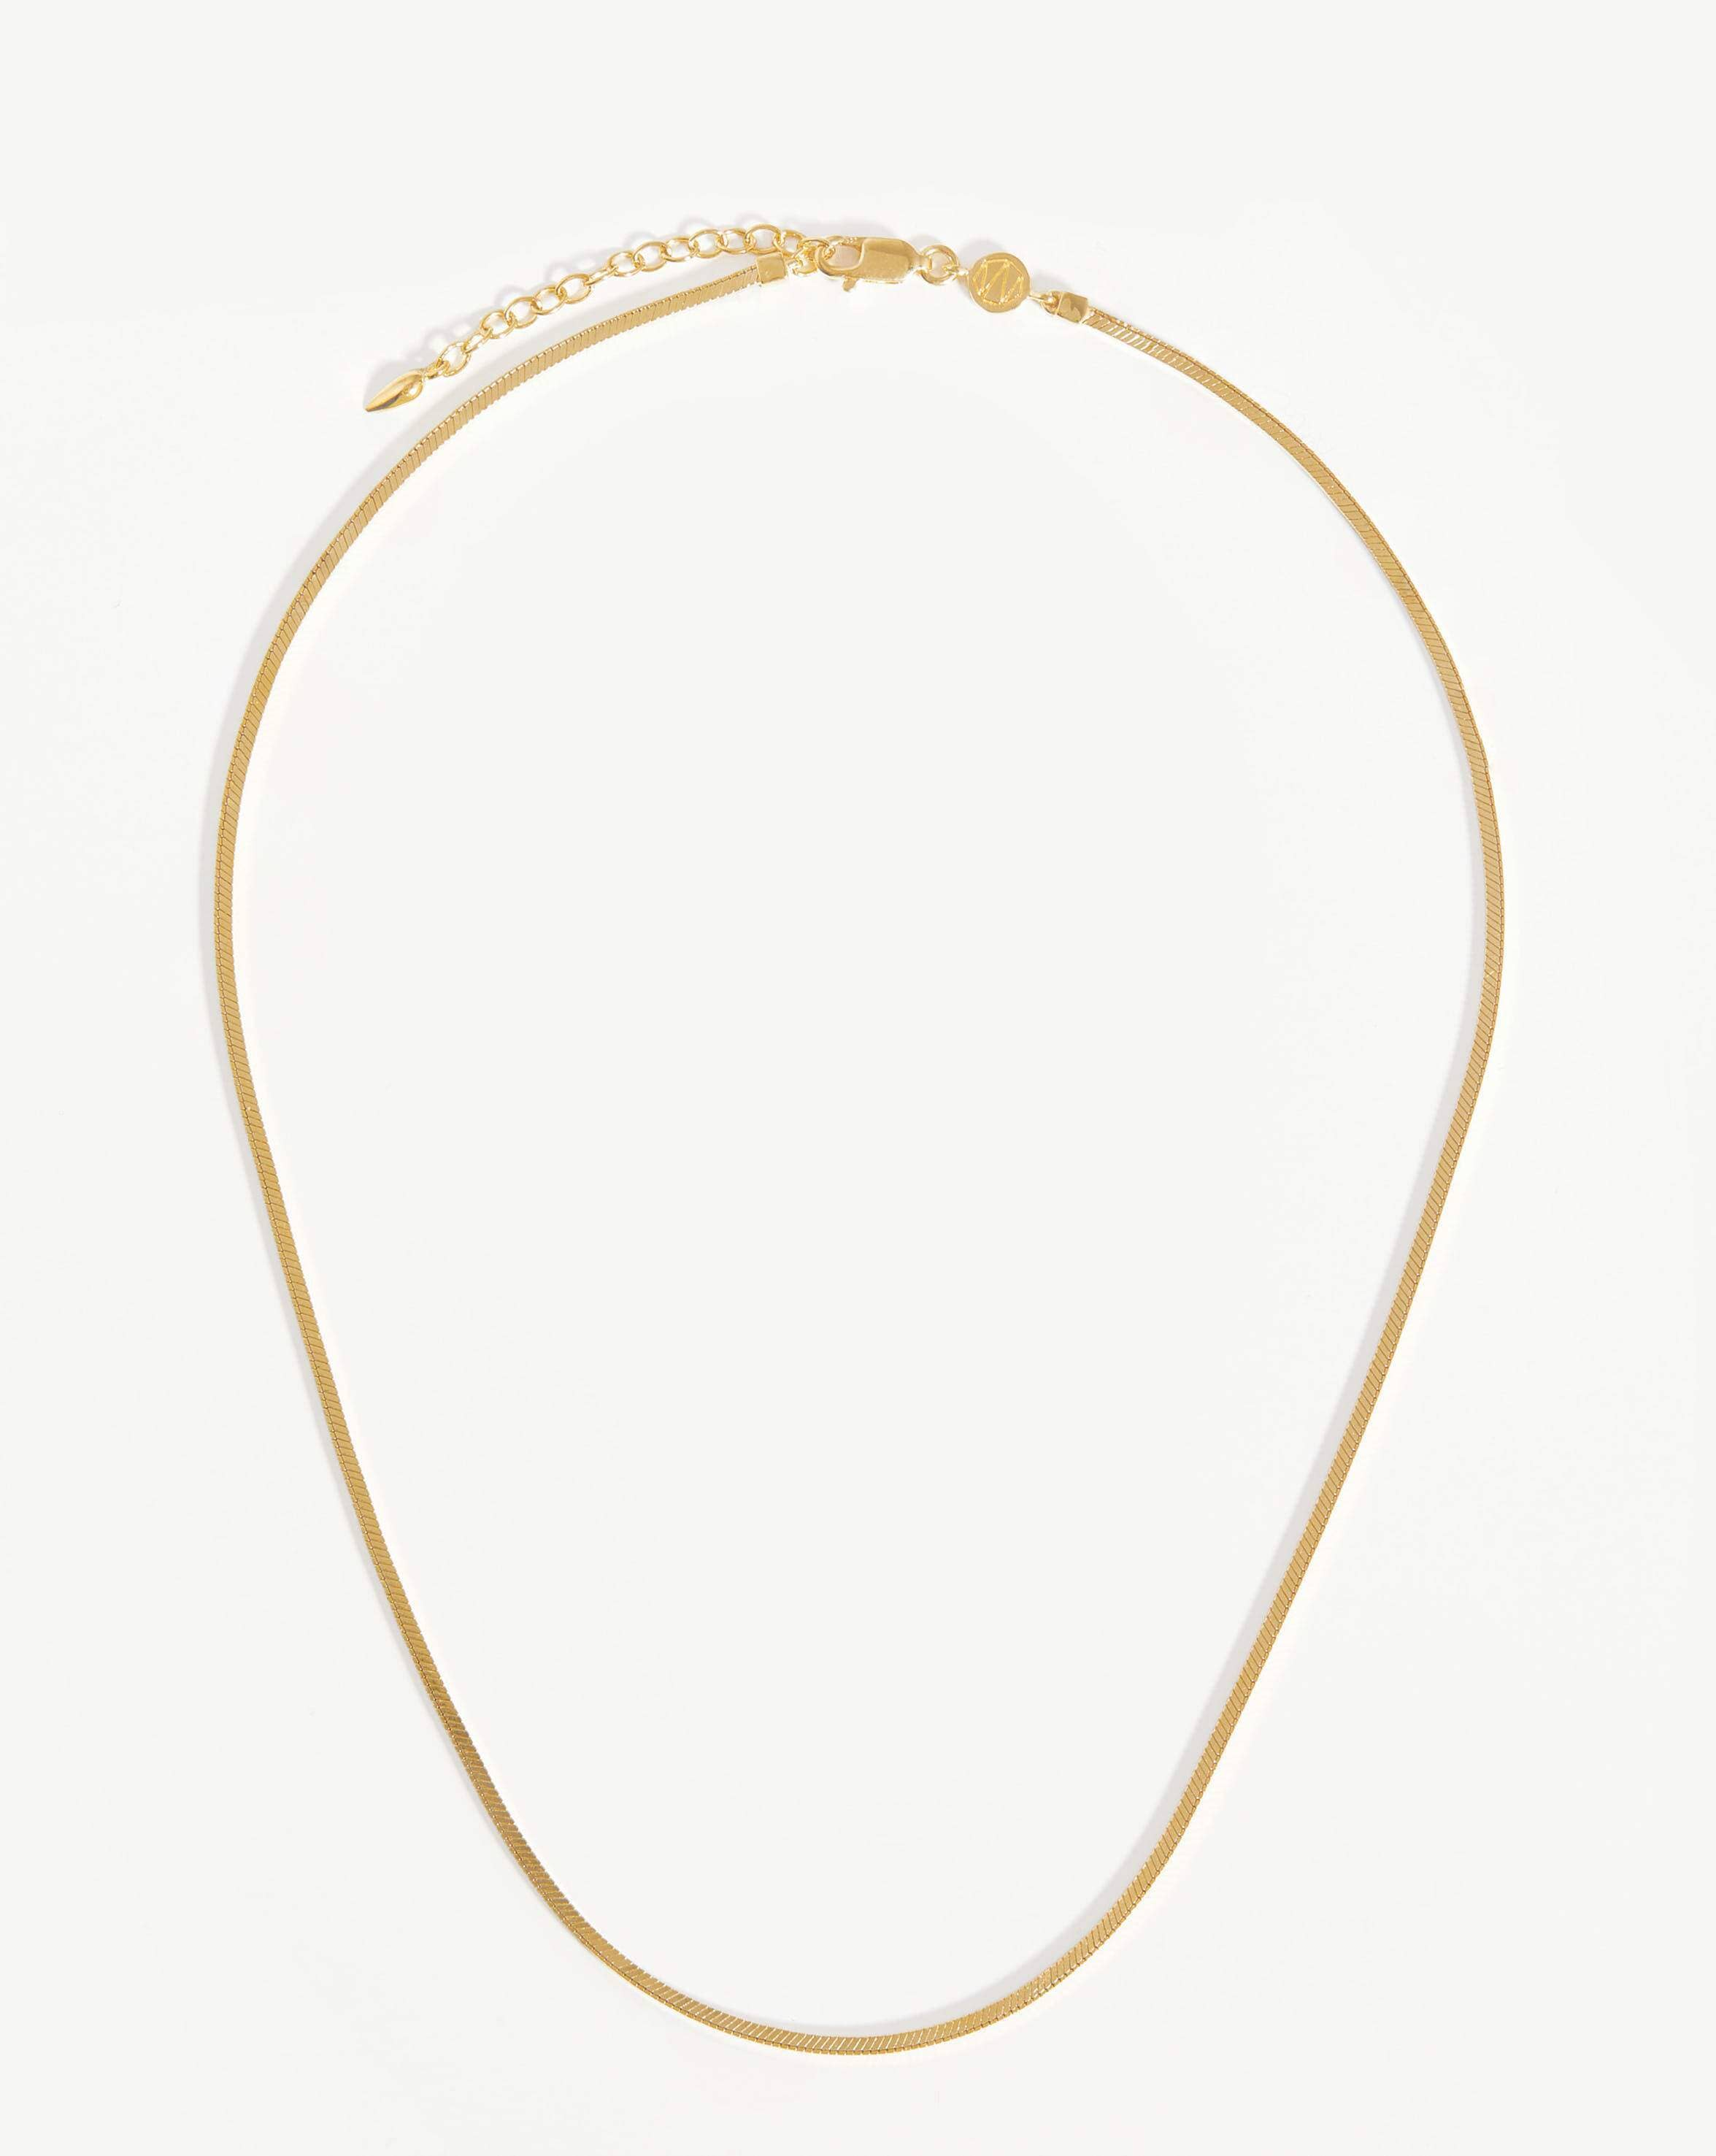 Lucy Williams Square Snake Chain Necklace Necklaces Missoma 18ct Gold Plated Vermeil 